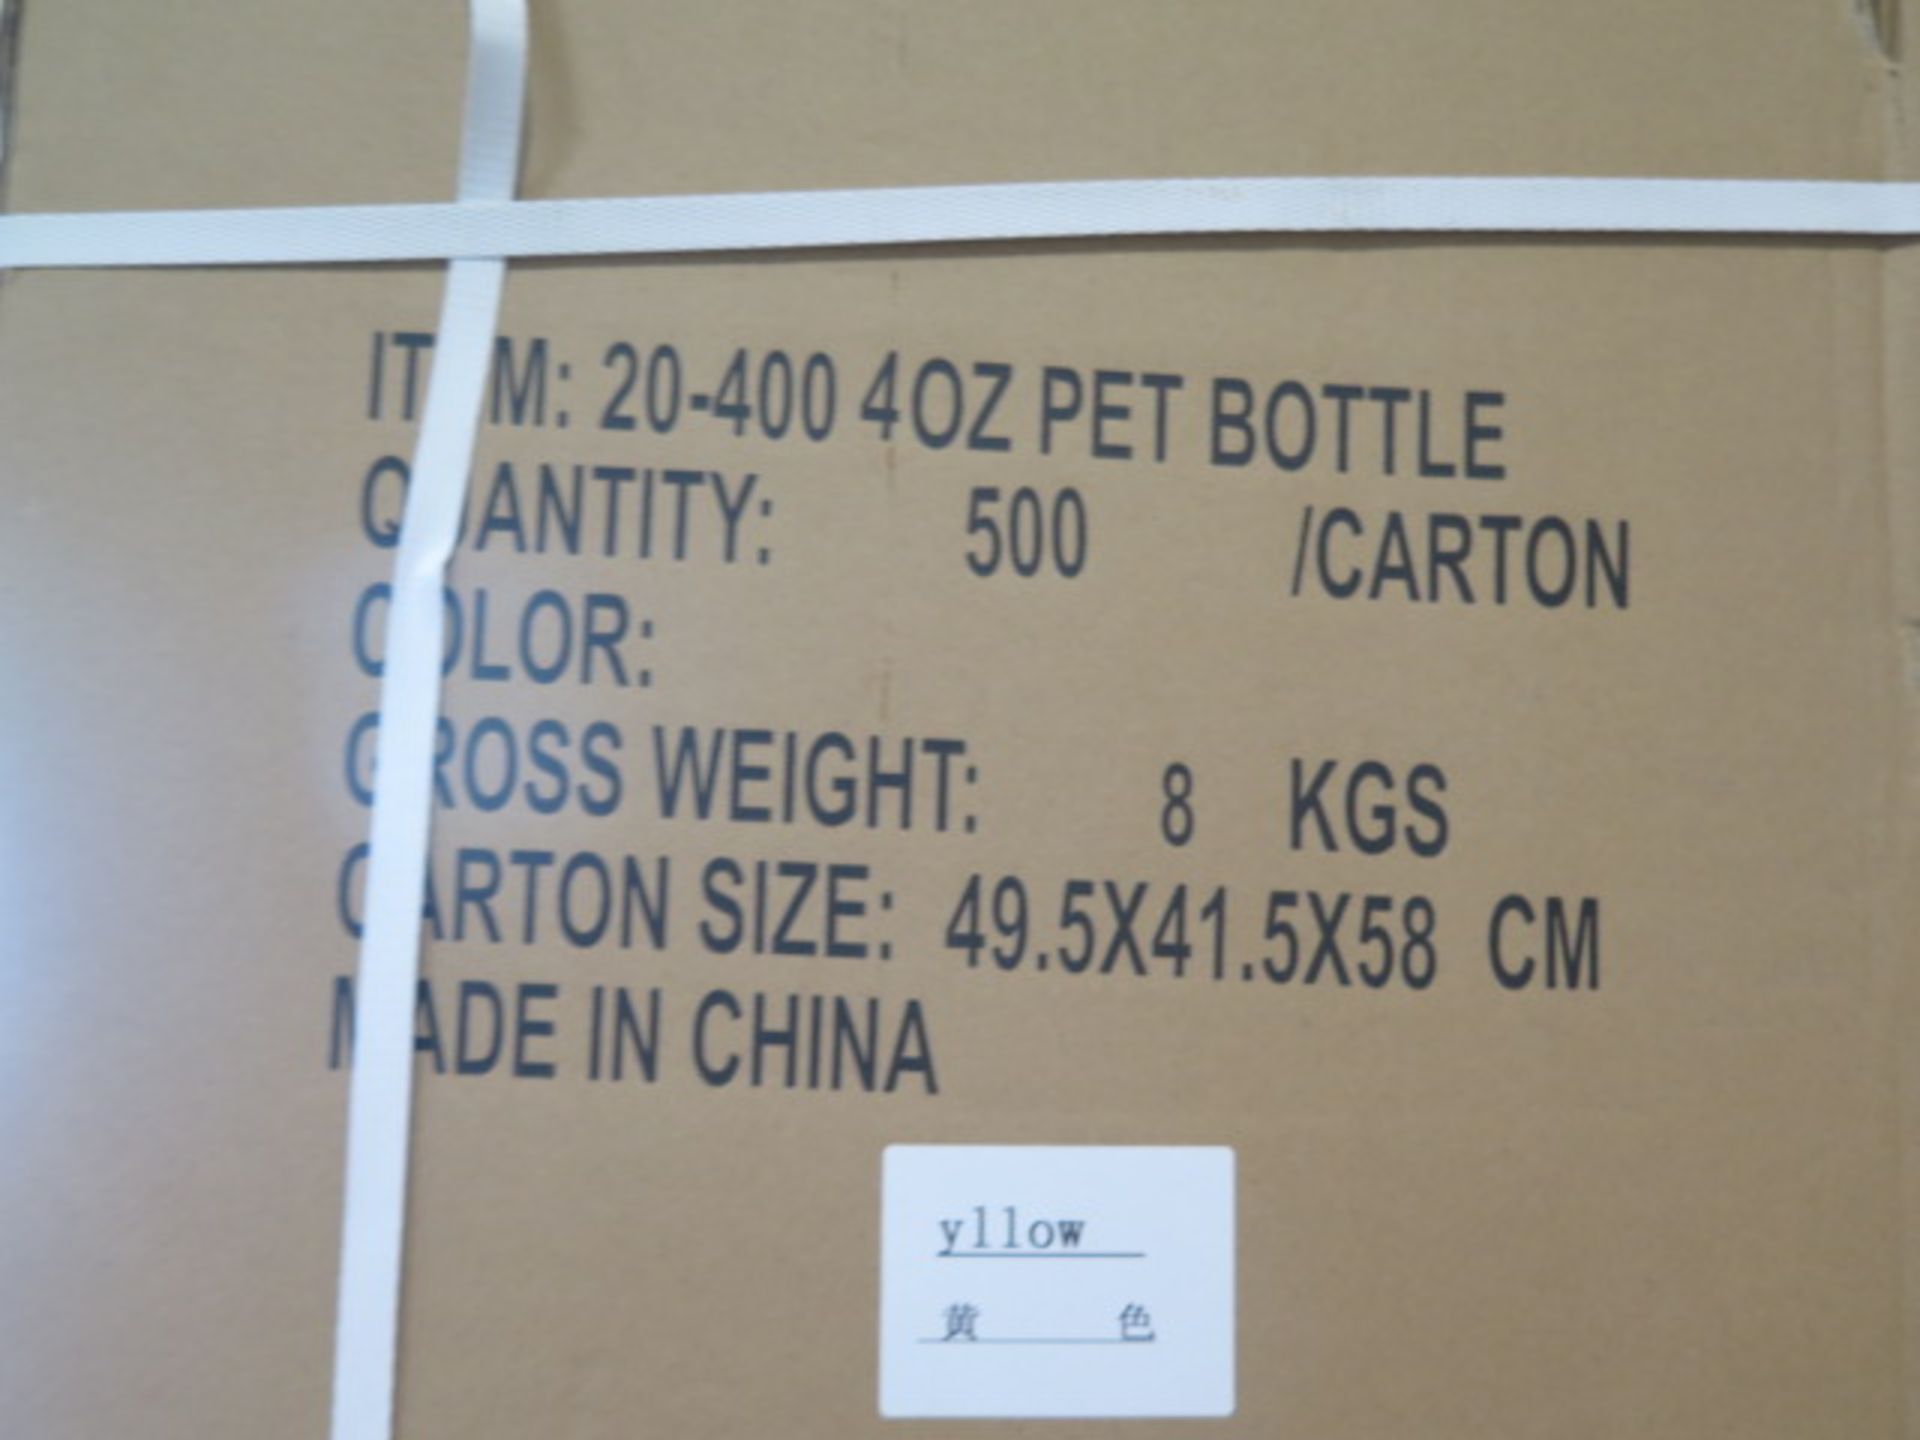 4 oz Brown 24-400 Plastic Bottles (7-Pallets) Approx 59,000 Bottles) and 4oz Yellow 20, SOLD AS IS - Image 6 of 10